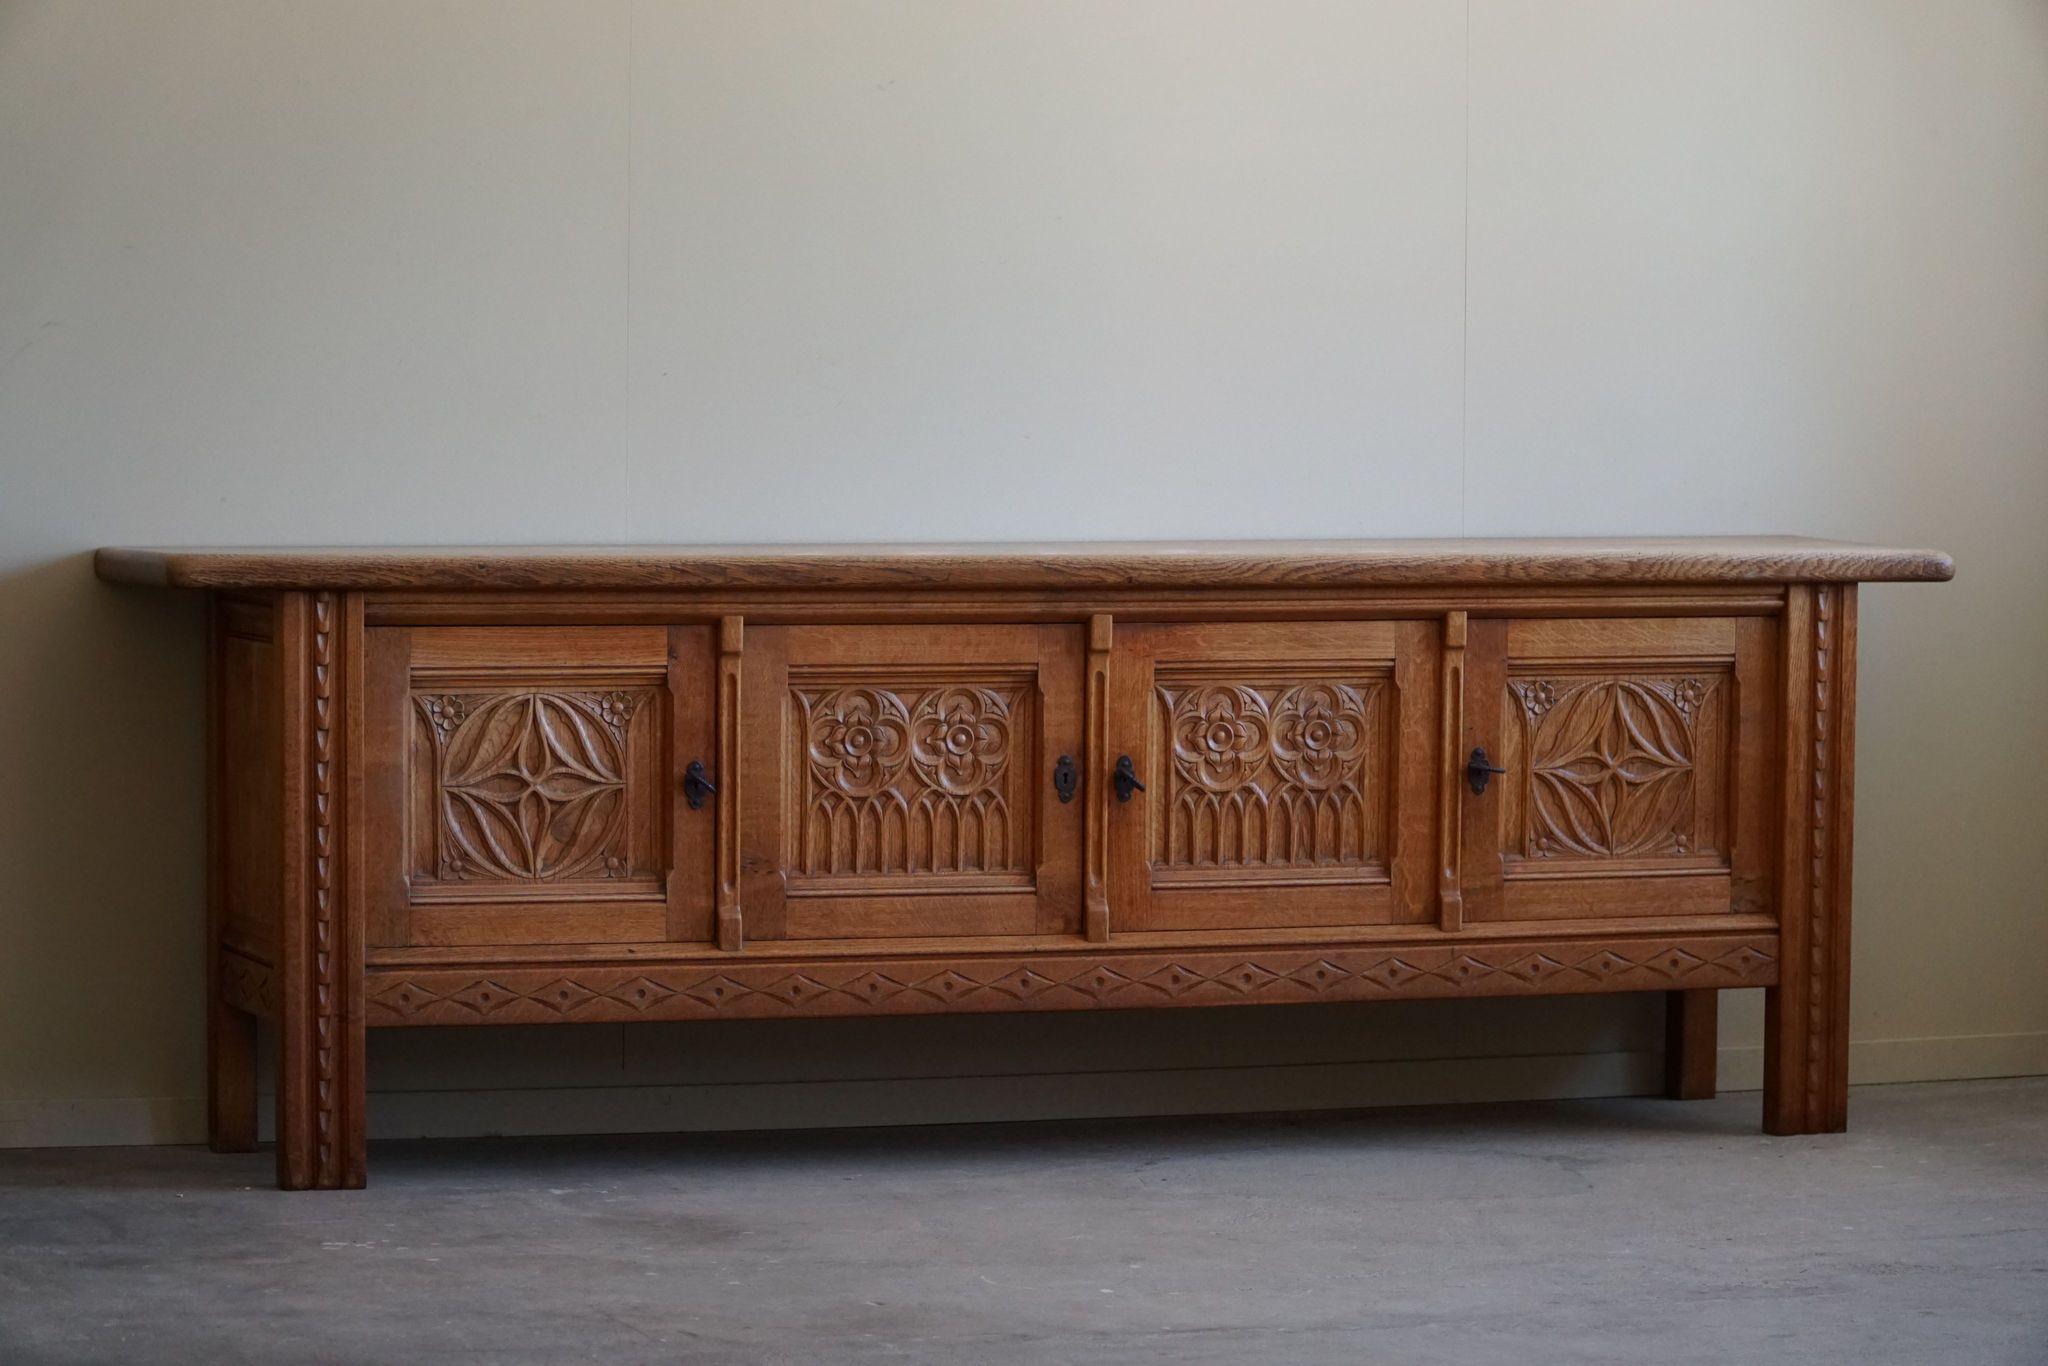 Mid Century Modern Sideboard in Oak, Handcrafted by a Danish Cabinetmaker, 1950s For Sale 14